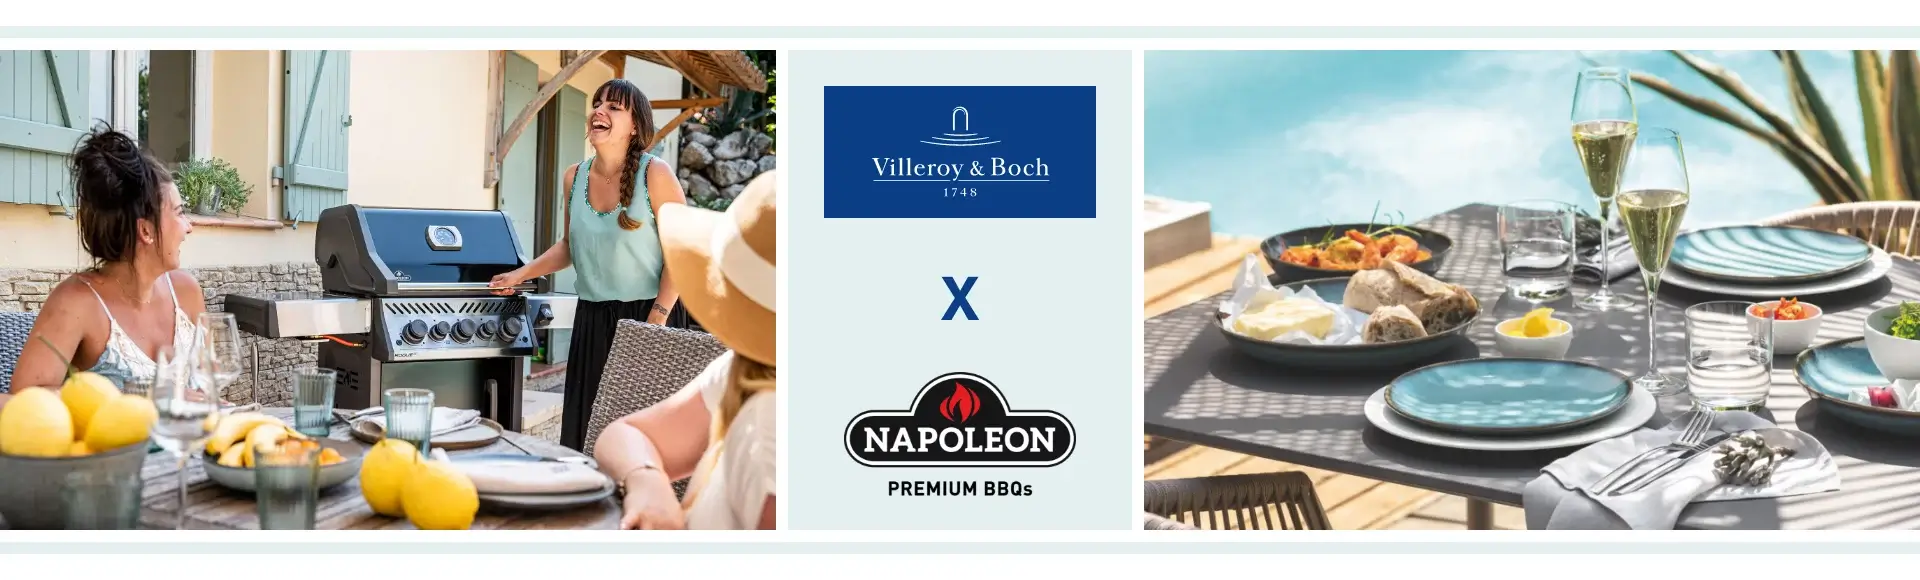 Win a Napoleon Premium BBQ with Villeroy & Boch